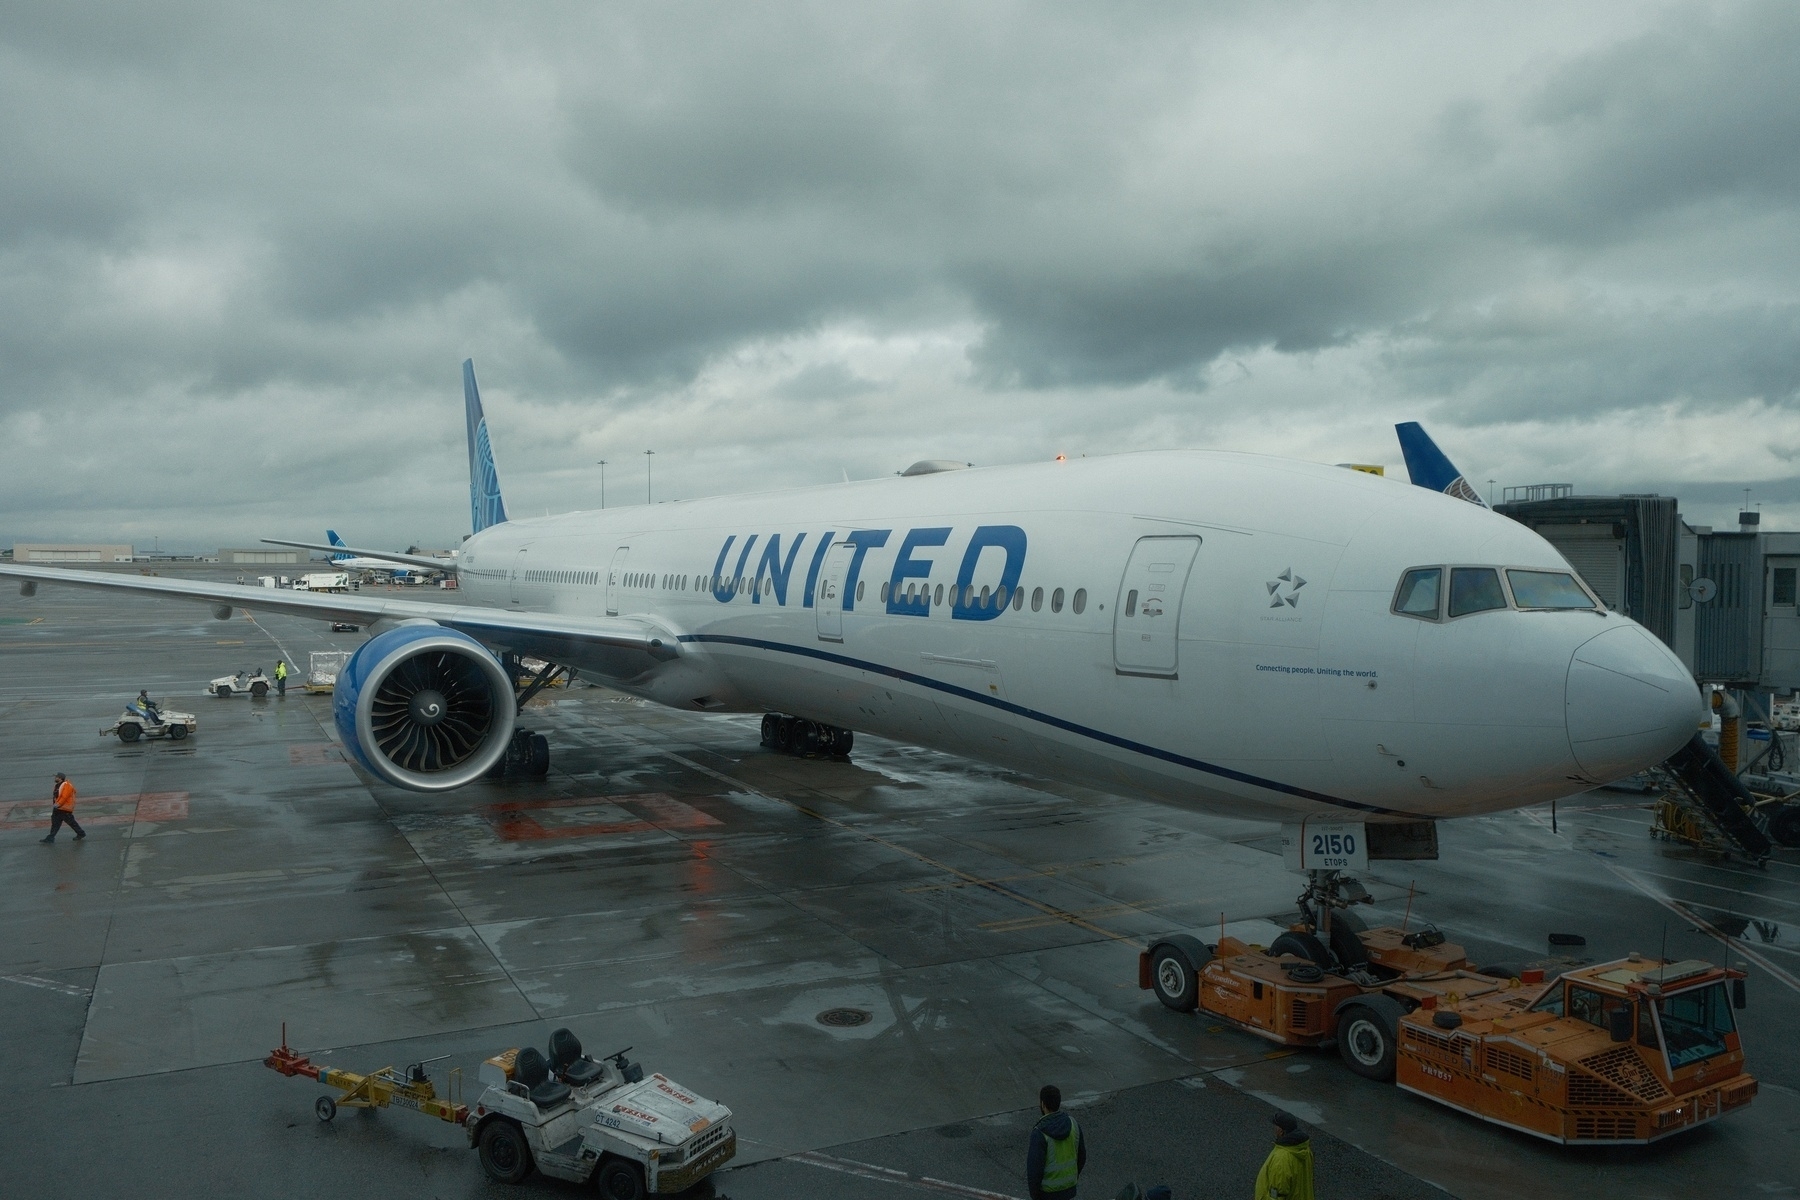 United 777-300 parked at SFO gate G9 just as it’s towed in. It’s a cloudy day and the tarmac is wet and shiny.